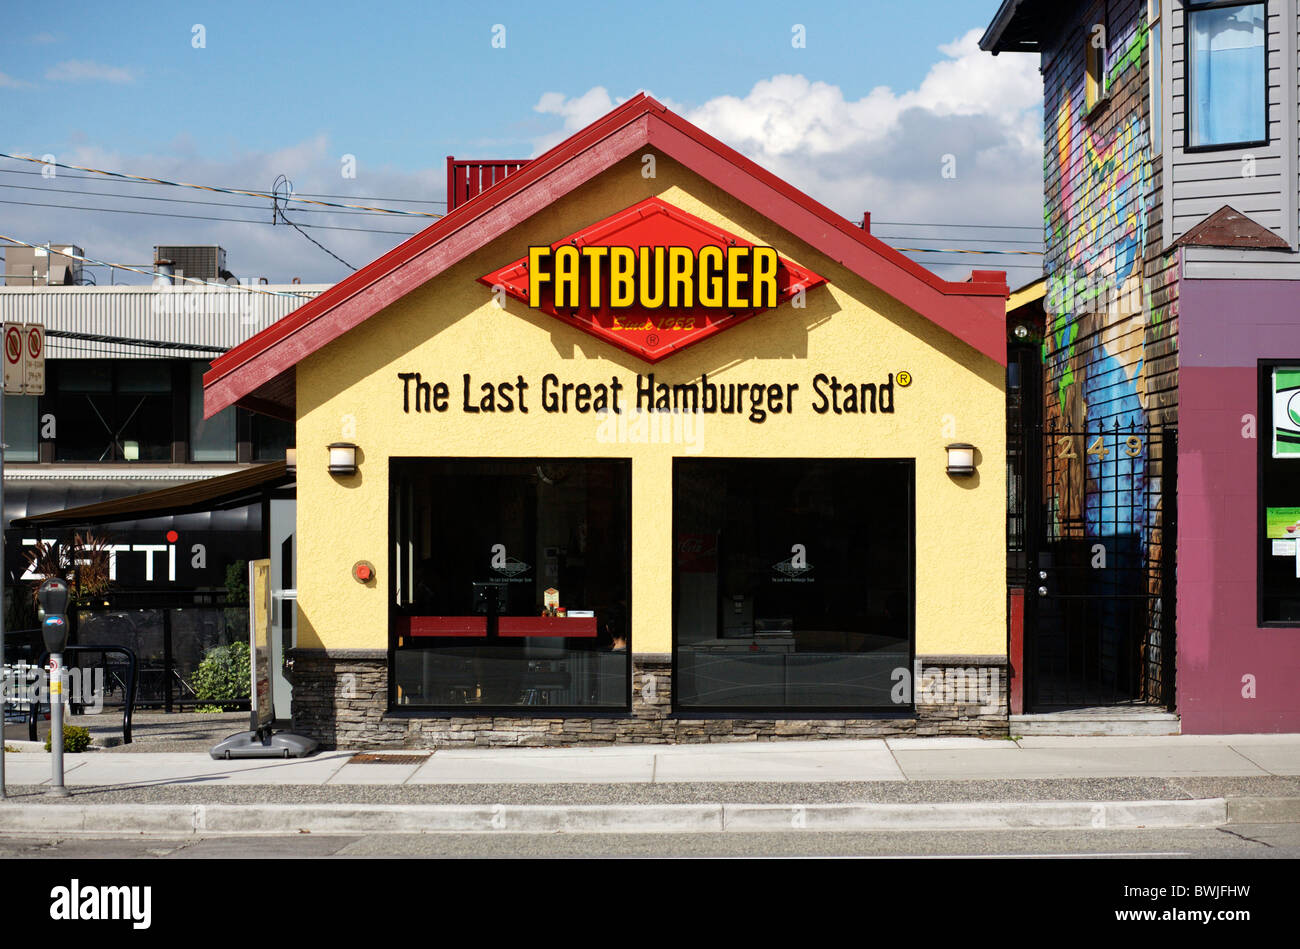 A Fatburger fast food restaurant in Vancouver, British Columbia, Canada  Stock Photo - Alamy